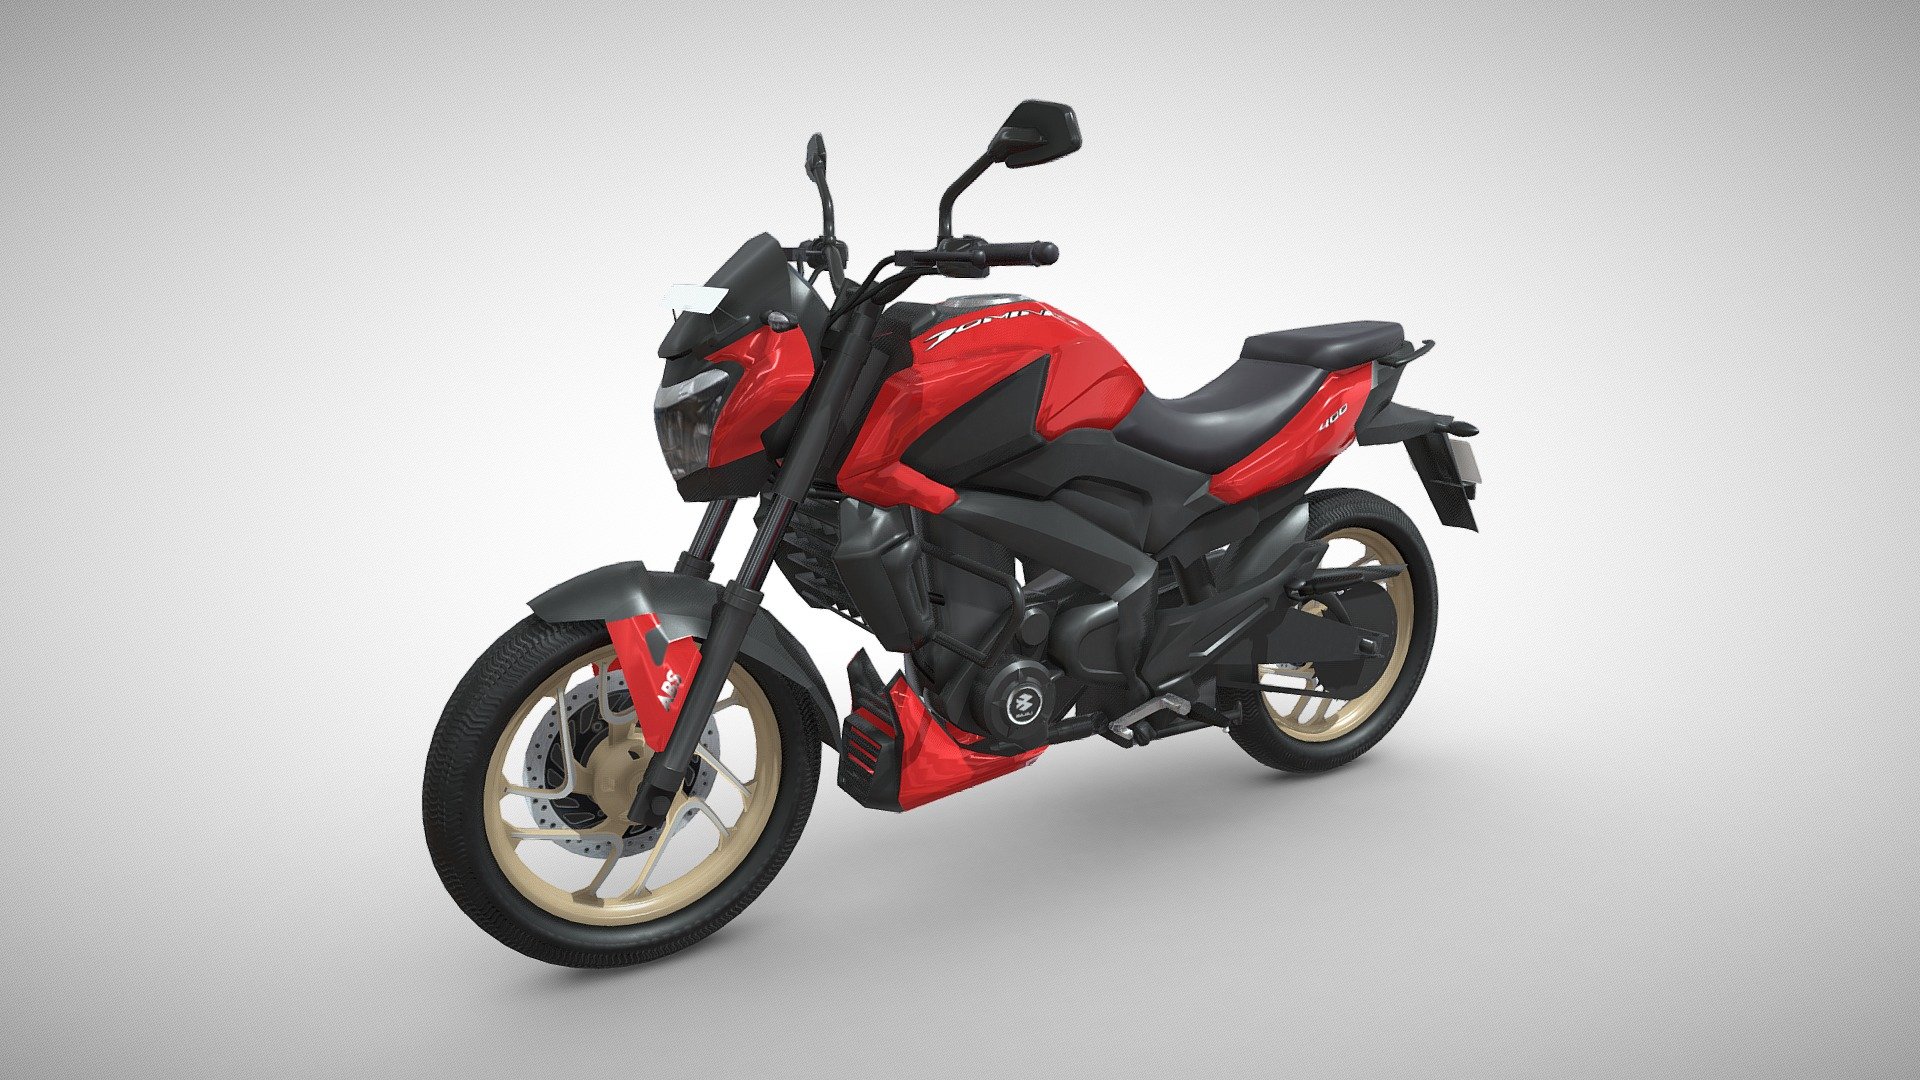 Introducing the Bajaj Dominar 400, a high-performance sports motorcycle that combines style and power. The 3D model features accurate representation of the bike, down to the smallest details. Whether you're a fan of motorcycles or just appreciate beautiful design, this model is a must-see. Get ready to admire the beauty and power of the Bajaj Dominar 400 in stunning 3D detail. Get ready to experience the thrill of the ride with this stunning 3D model 3d model